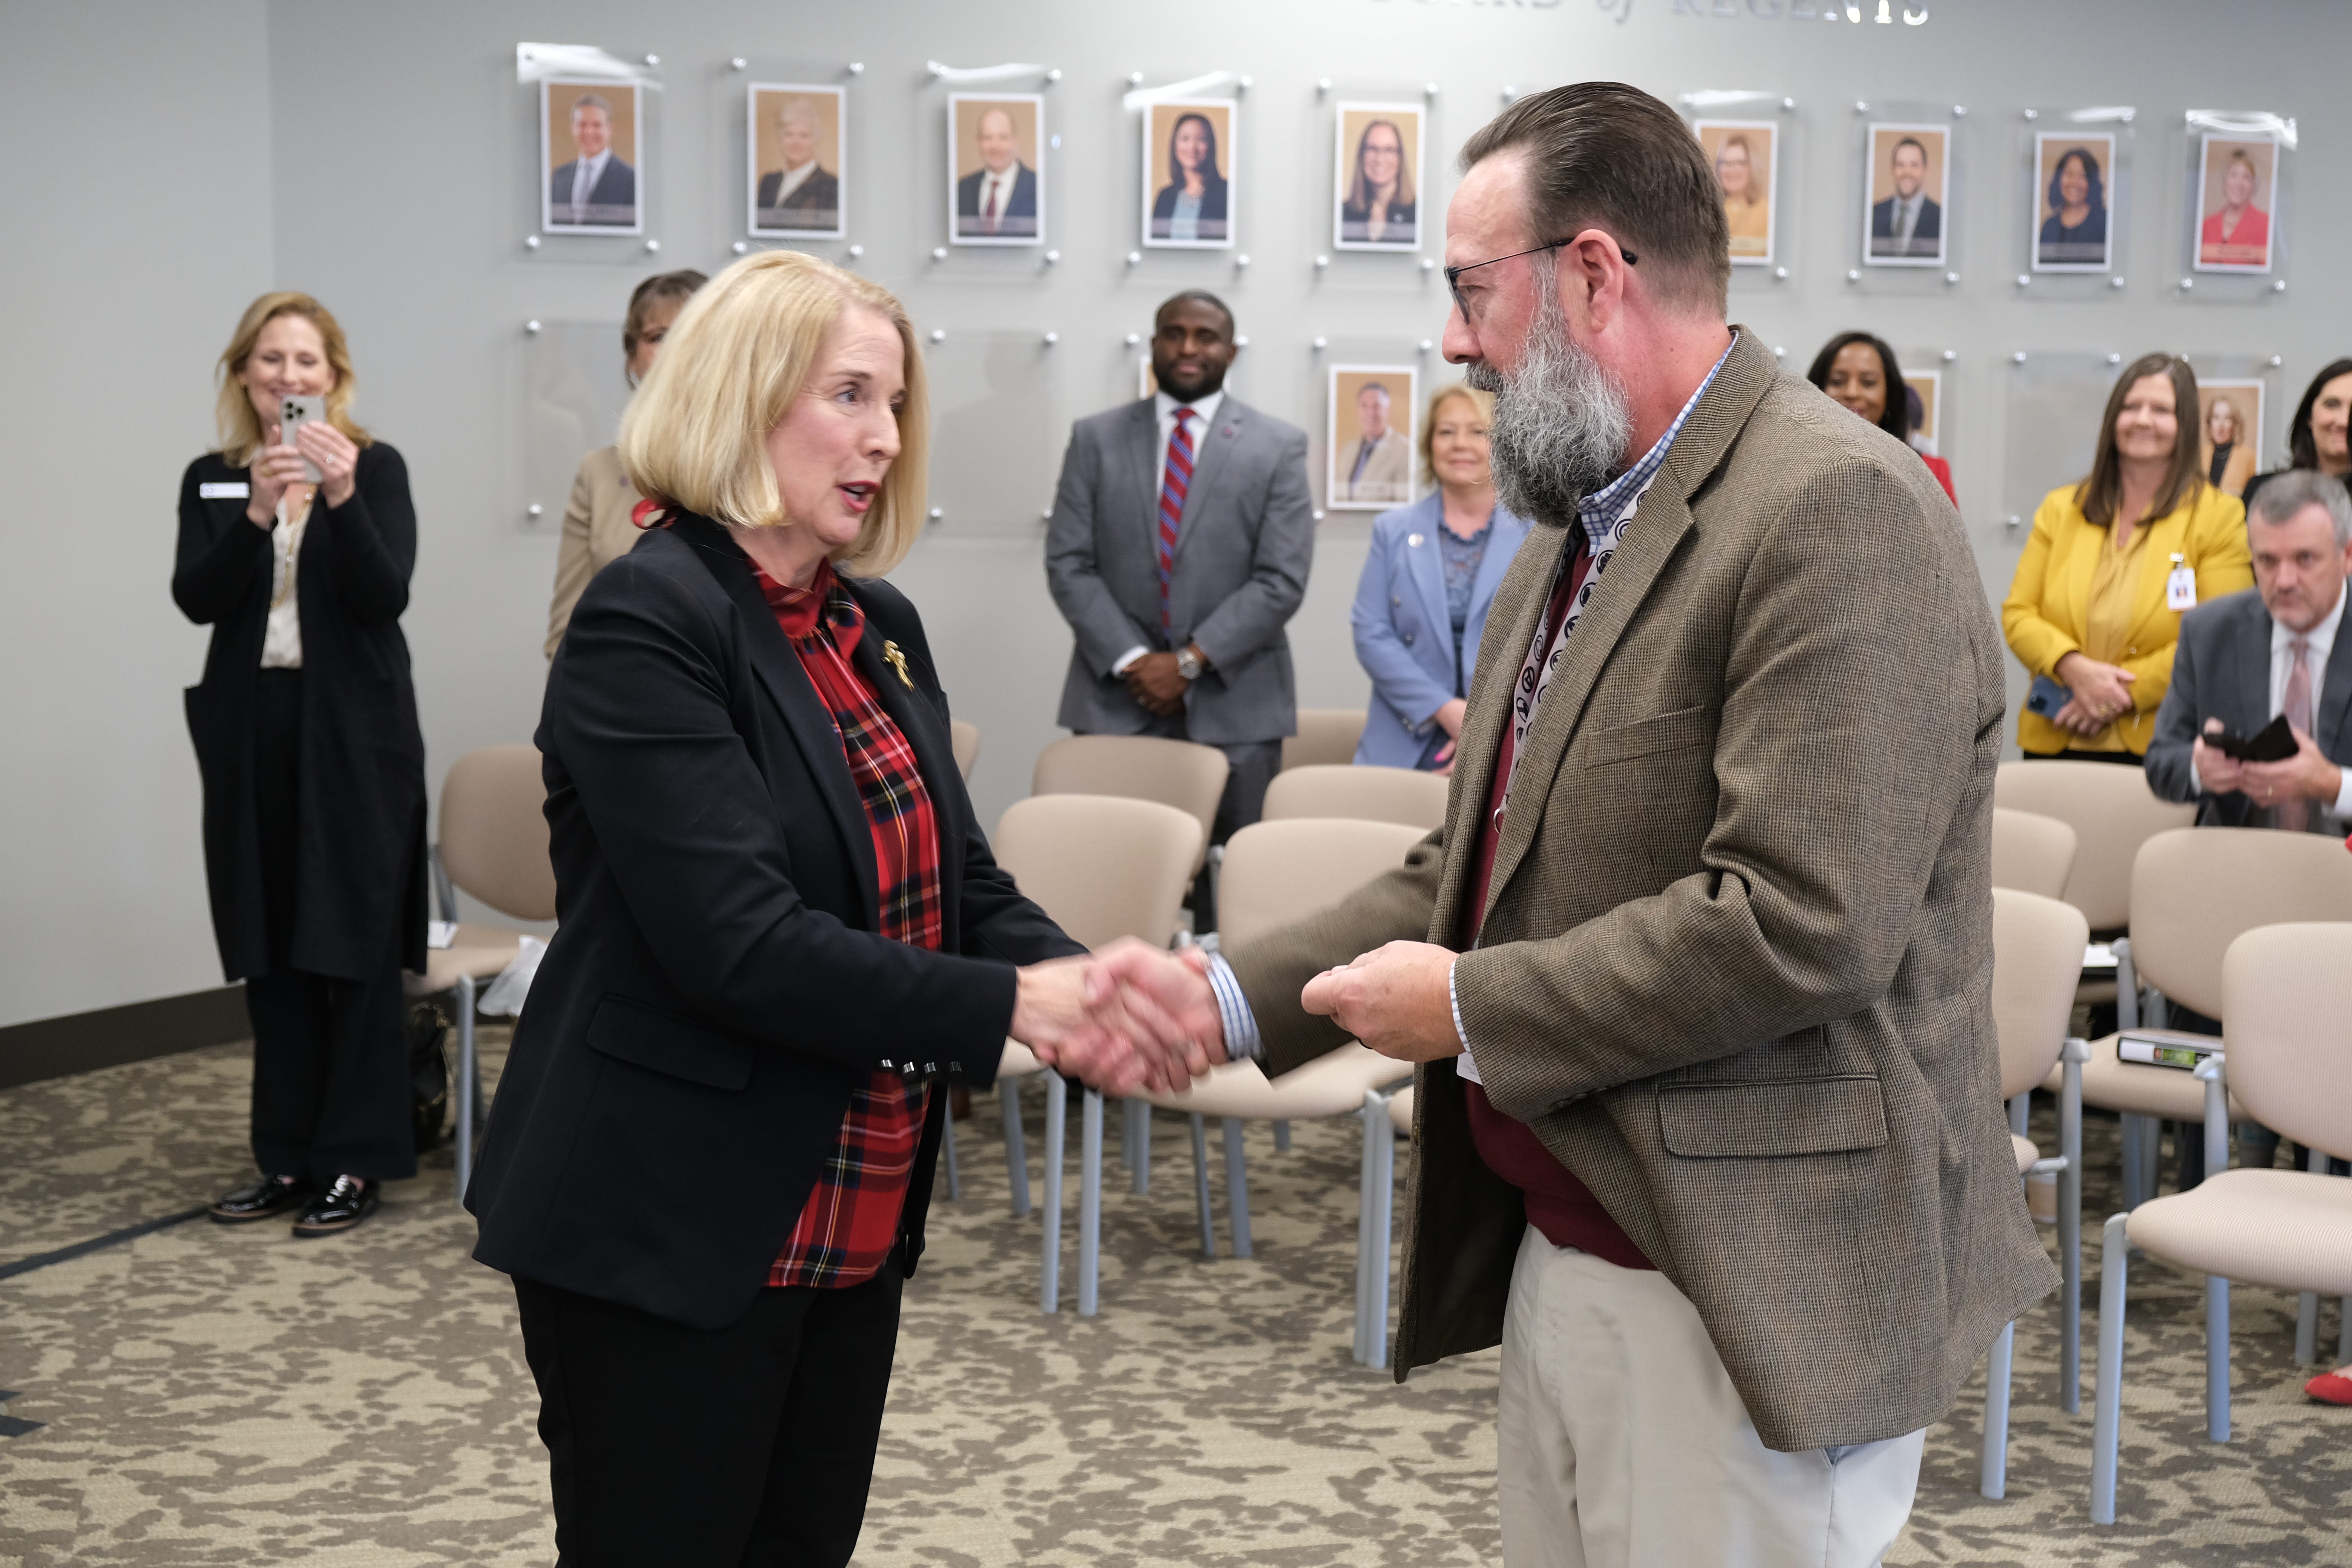 Tennessee Board of Regents Chancellor Flora W. Tydings presents the Chancellor’s Commendation for Military Veterans to Associate Vice Chancellor for Academic Affairs Robert Denn, a veteran of the U.S. Marines, during a ceremony on Dec. 1, 2022. Tydings established the commendation in 2020 to honor veterans on TBR campuses statewide.